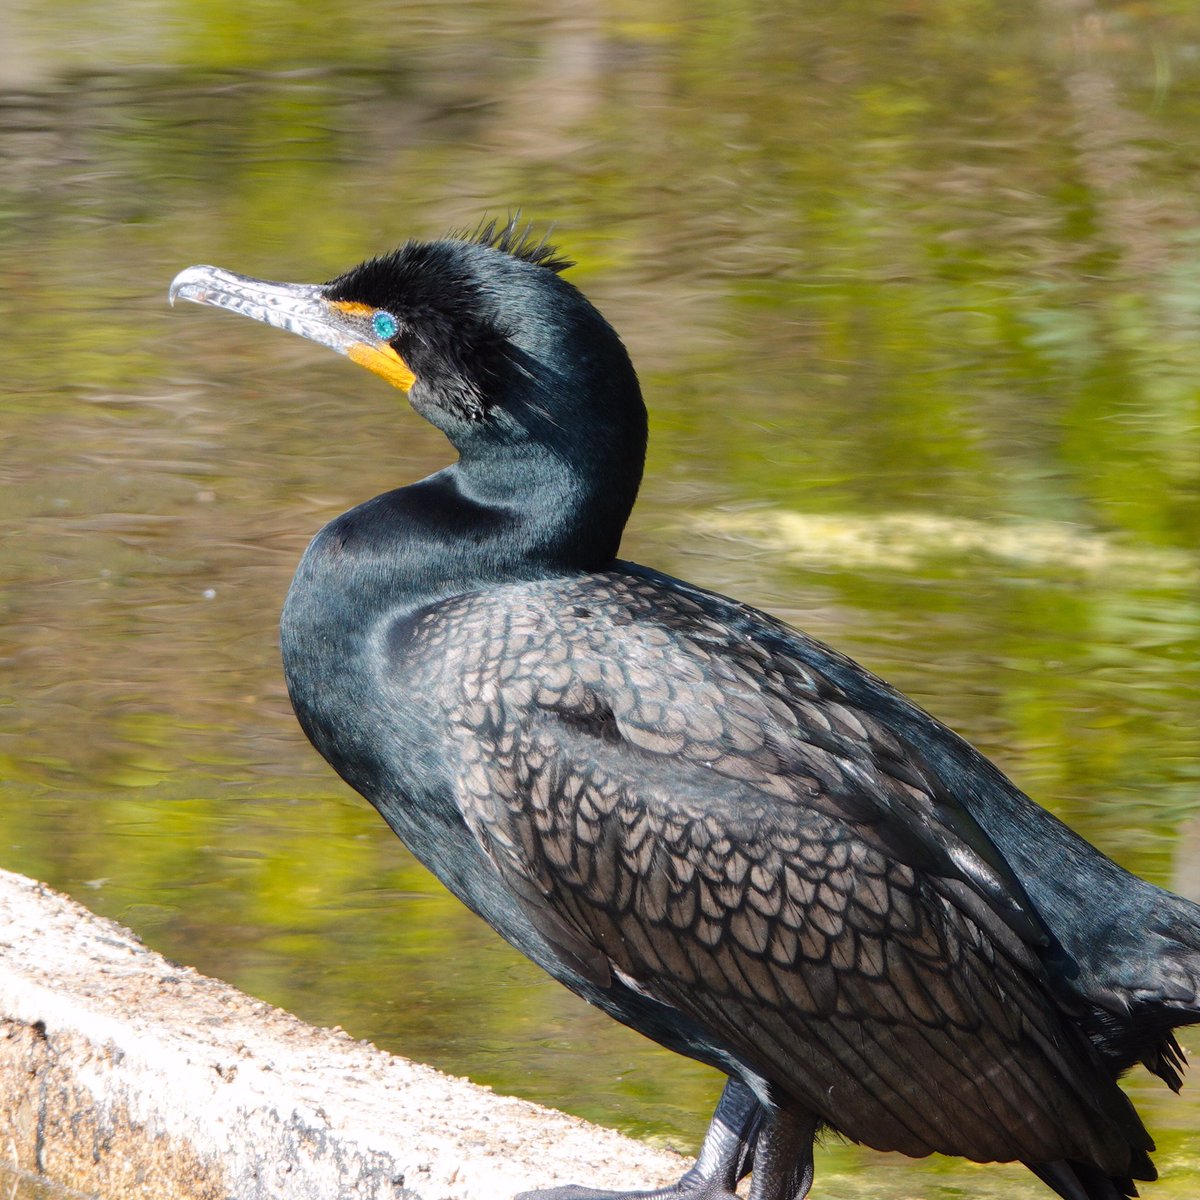 Cormorants always remind me a little of dinosaurs. And when they’re in breeding plumage, the details can be quite stunning. I mean, those eyes! Like I said, stunning! #doublecrestedcormorant #birding #centralparknyc #birds #birdcp #birdcpp #nycbirds